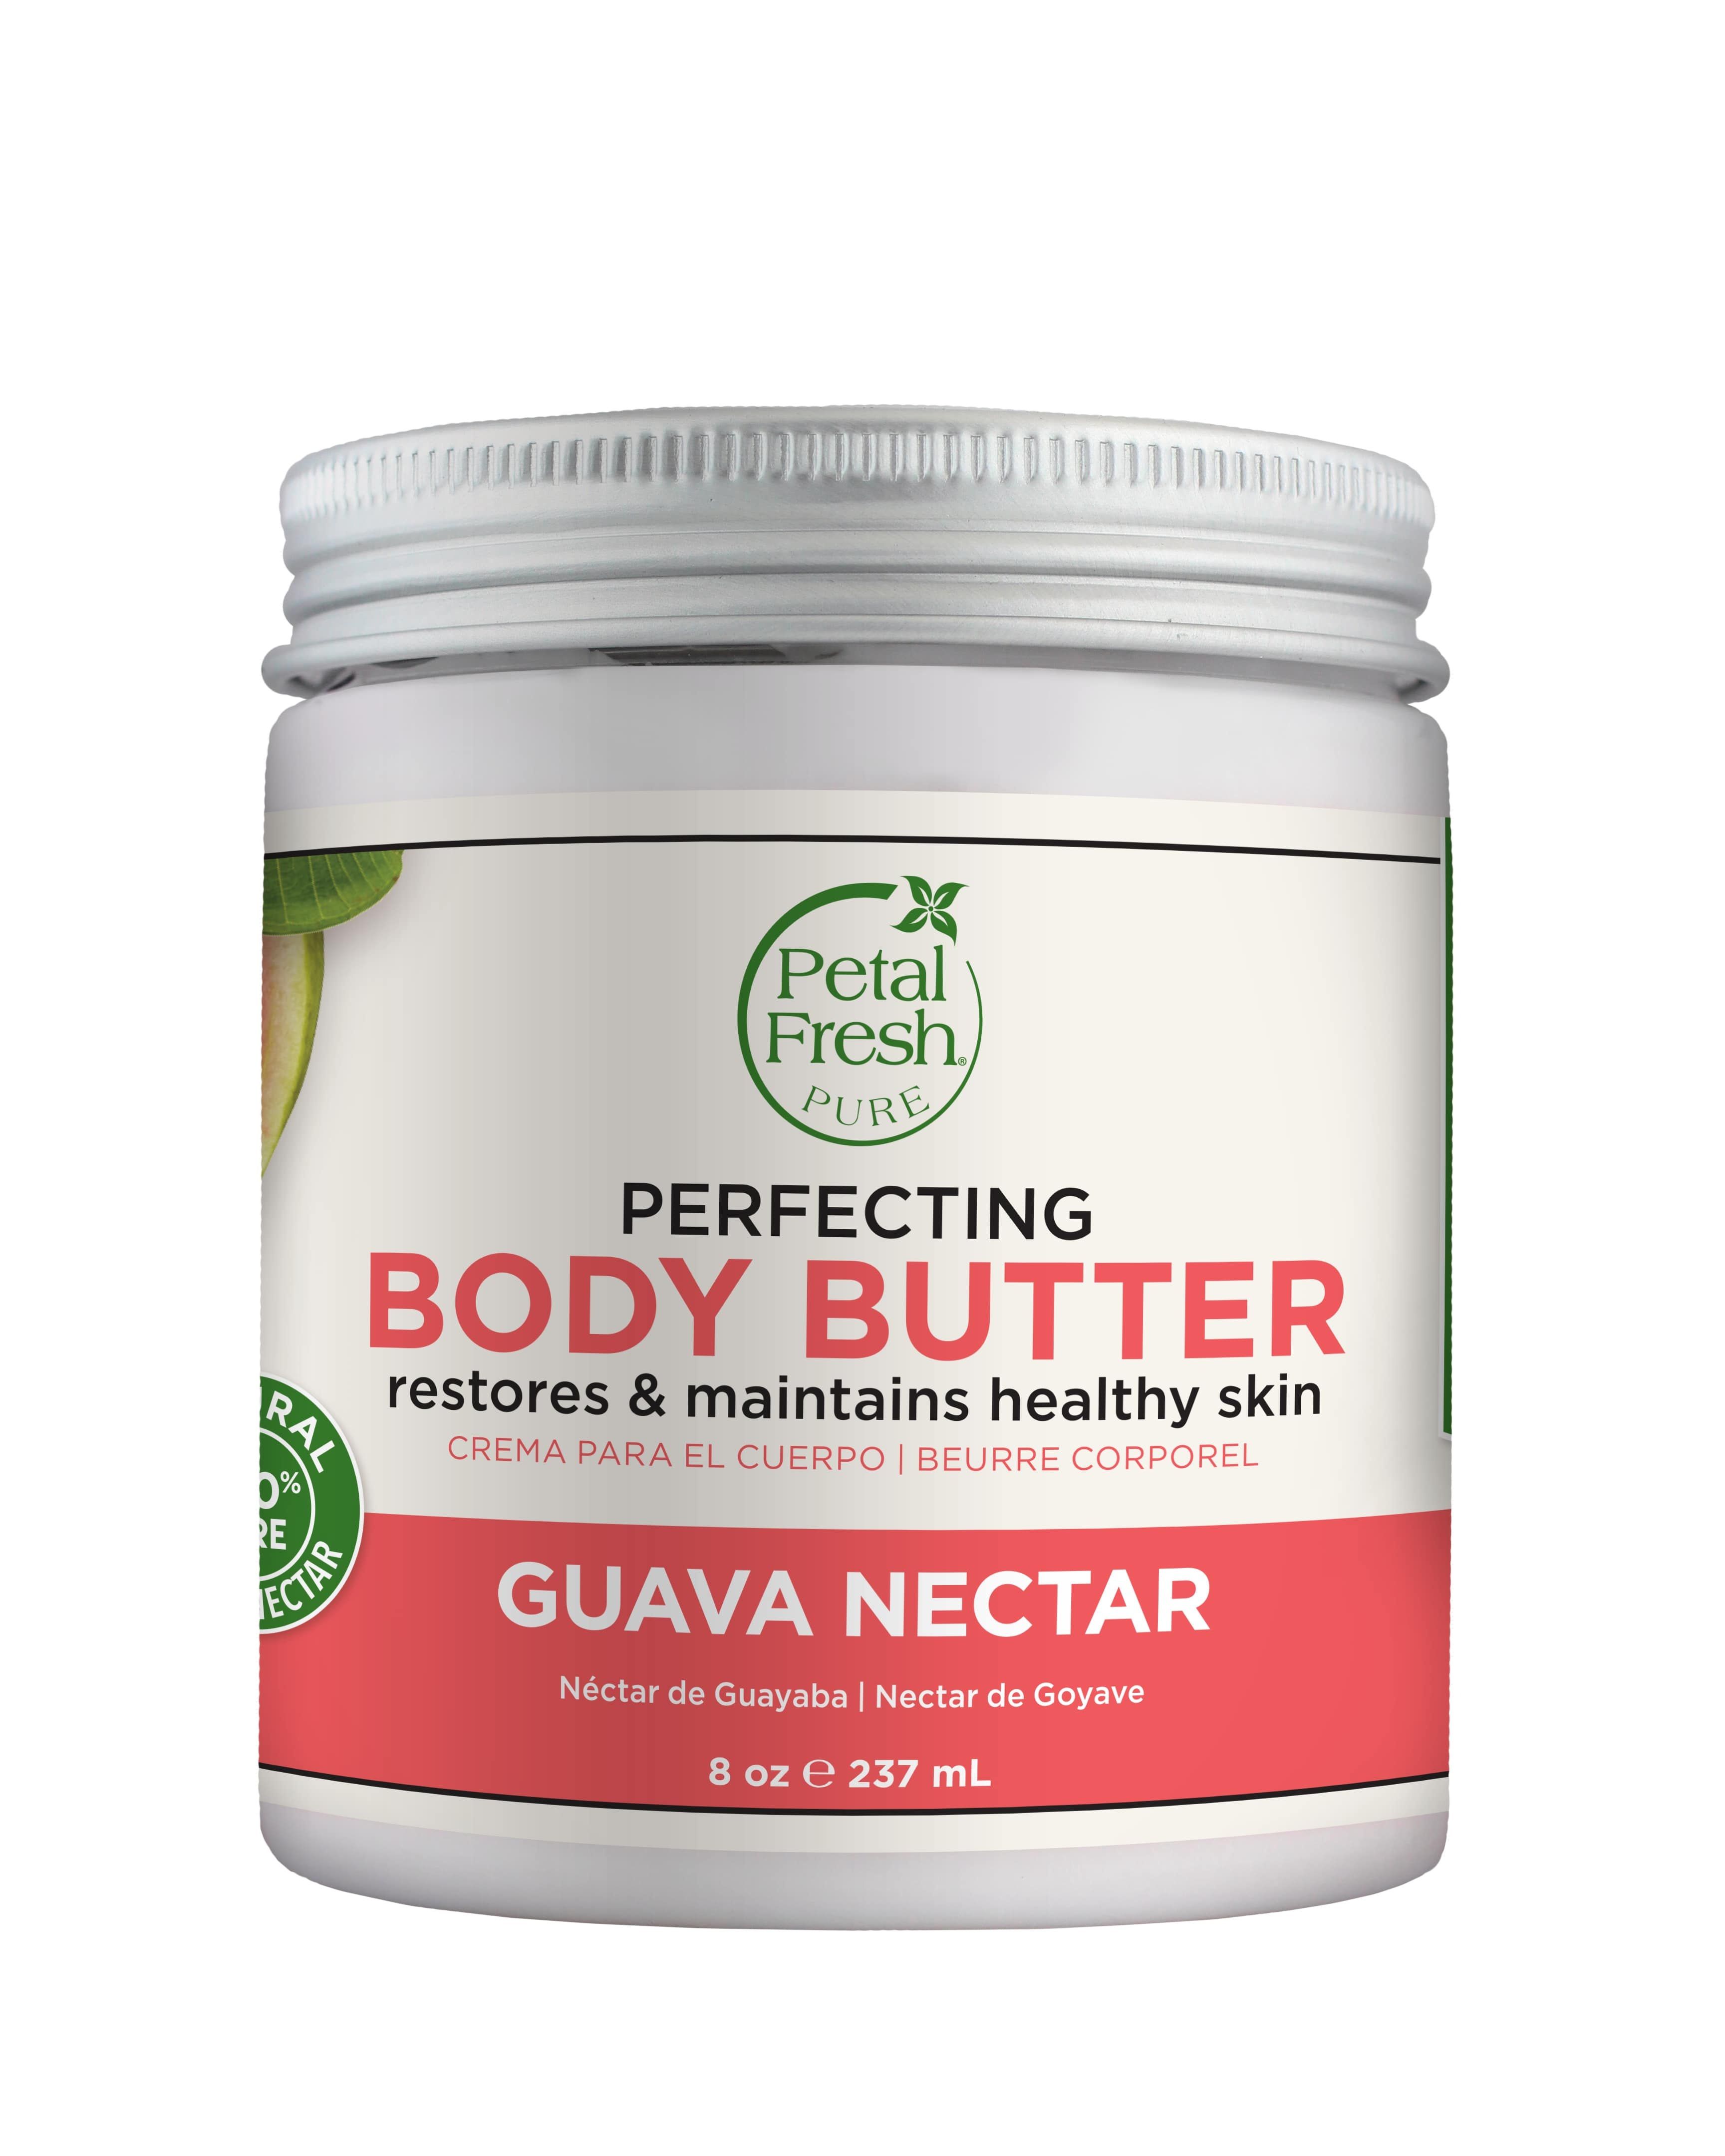 Petal Fresh Pure Guava Nectar Perfecting Body Butter